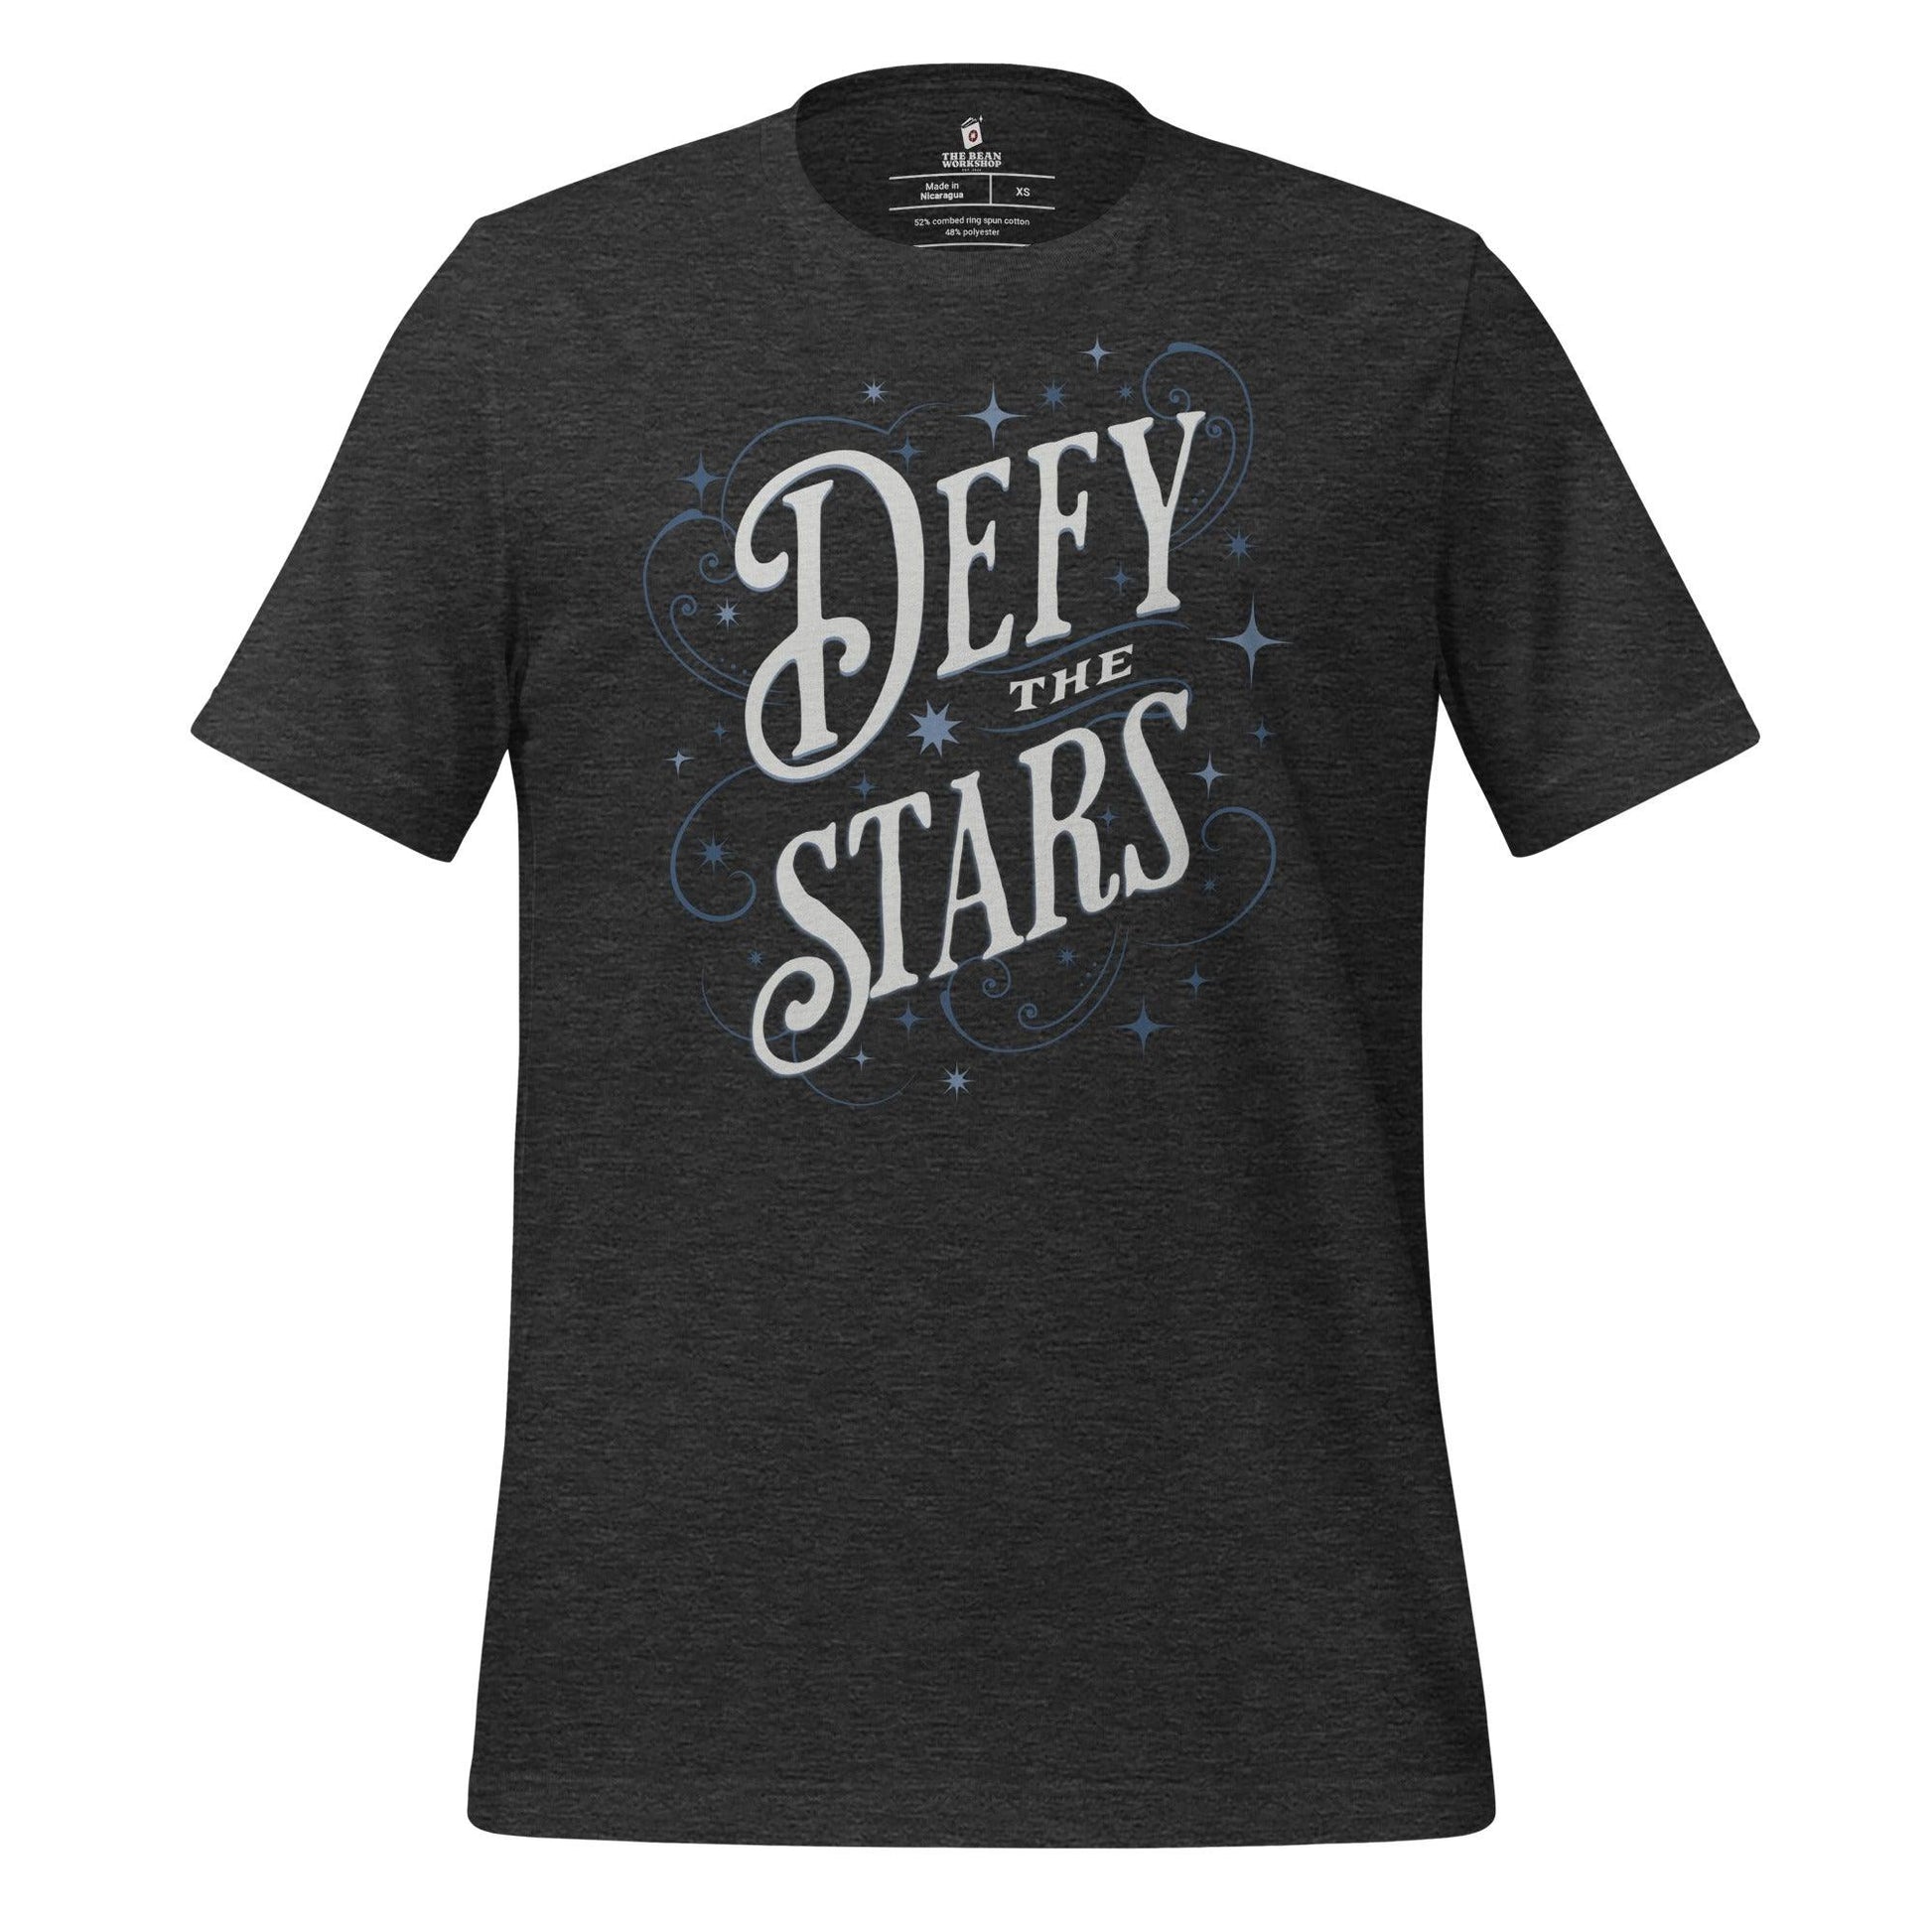 Defy The Stars T-Shirt - The Bean Workshop - t-shirt, twisted sisters, zodiac academy